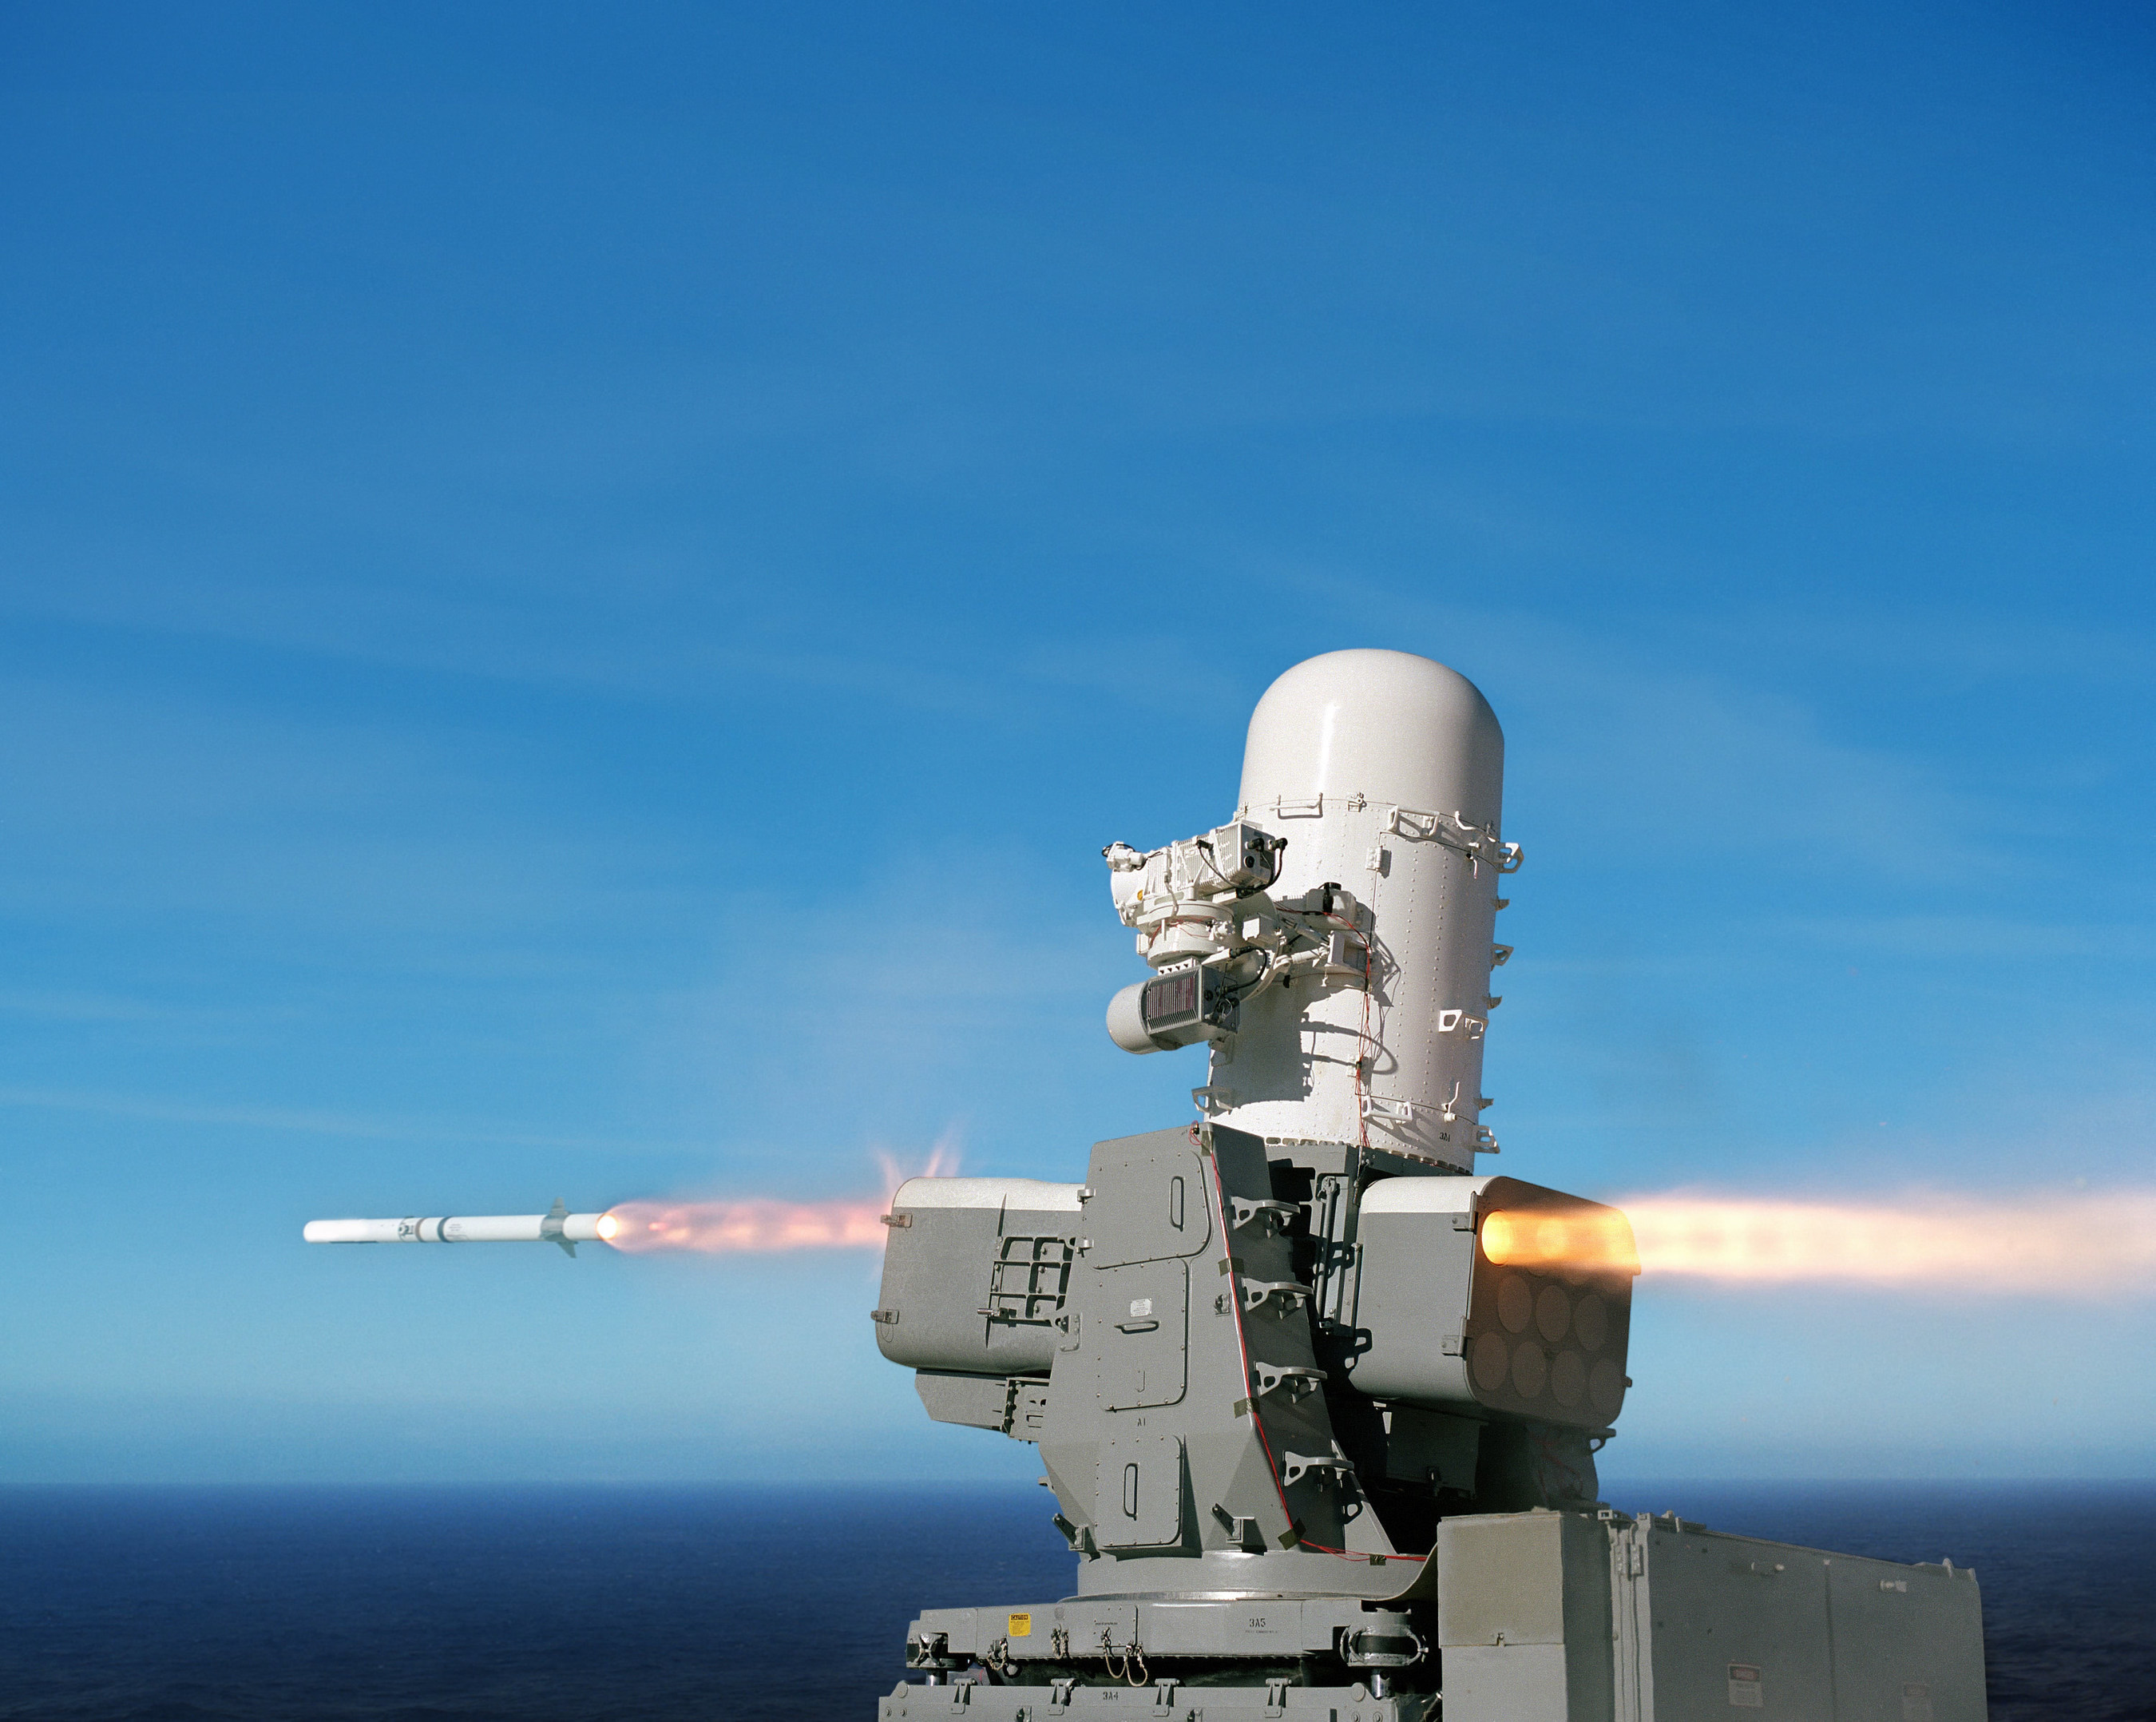 The Raytheon SeaRAM Anti-ship Missile Defense System is a low-risk evolution of the proven Phalanx Block 1B Close-In Weapon System and the Rolling Airframe Missile.